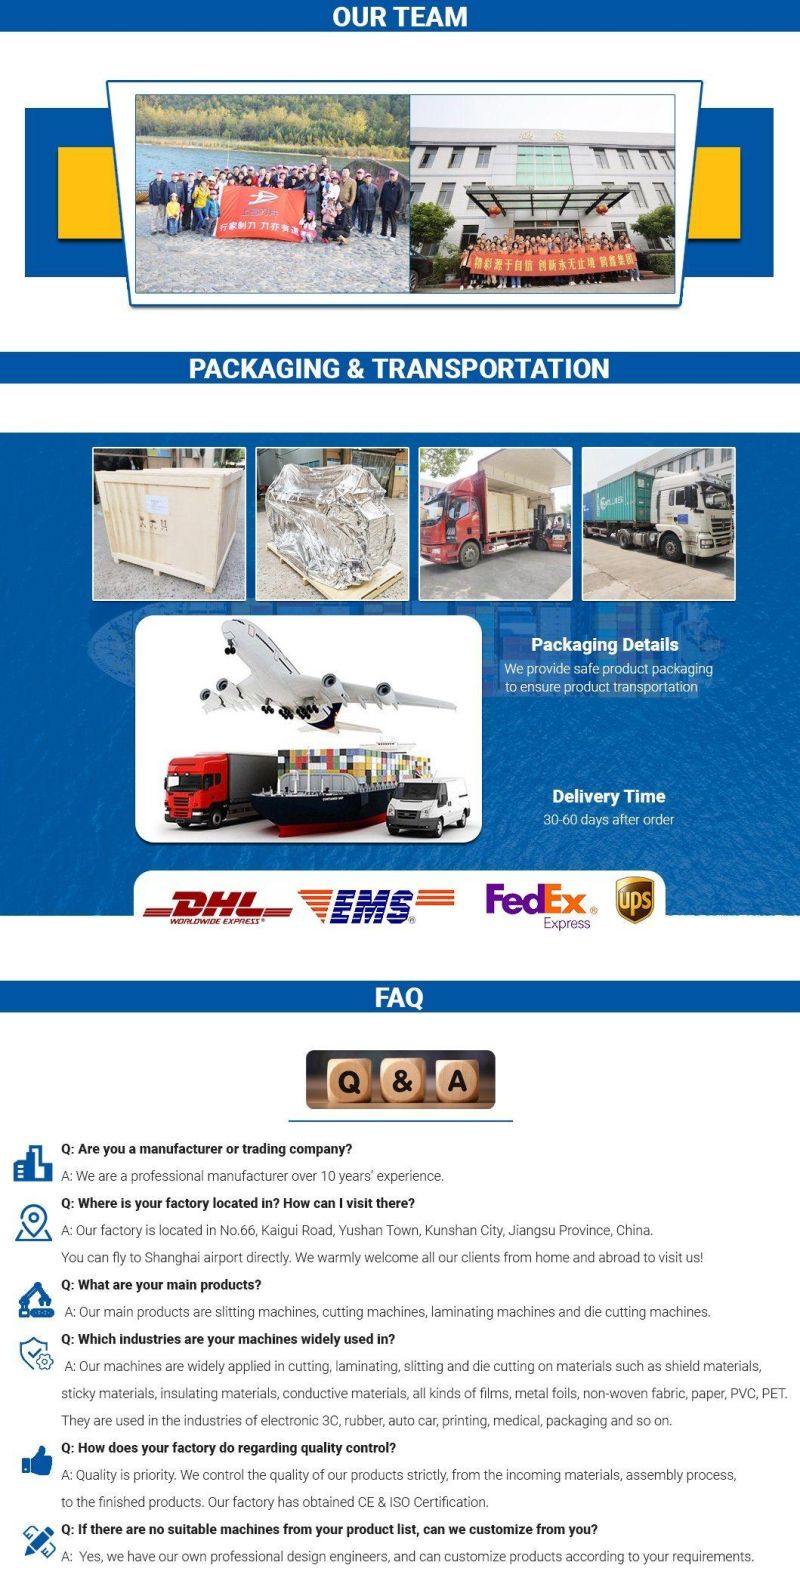 Paper Packaging Materials Stickers Products Punching Sheet Die Cutting Machine